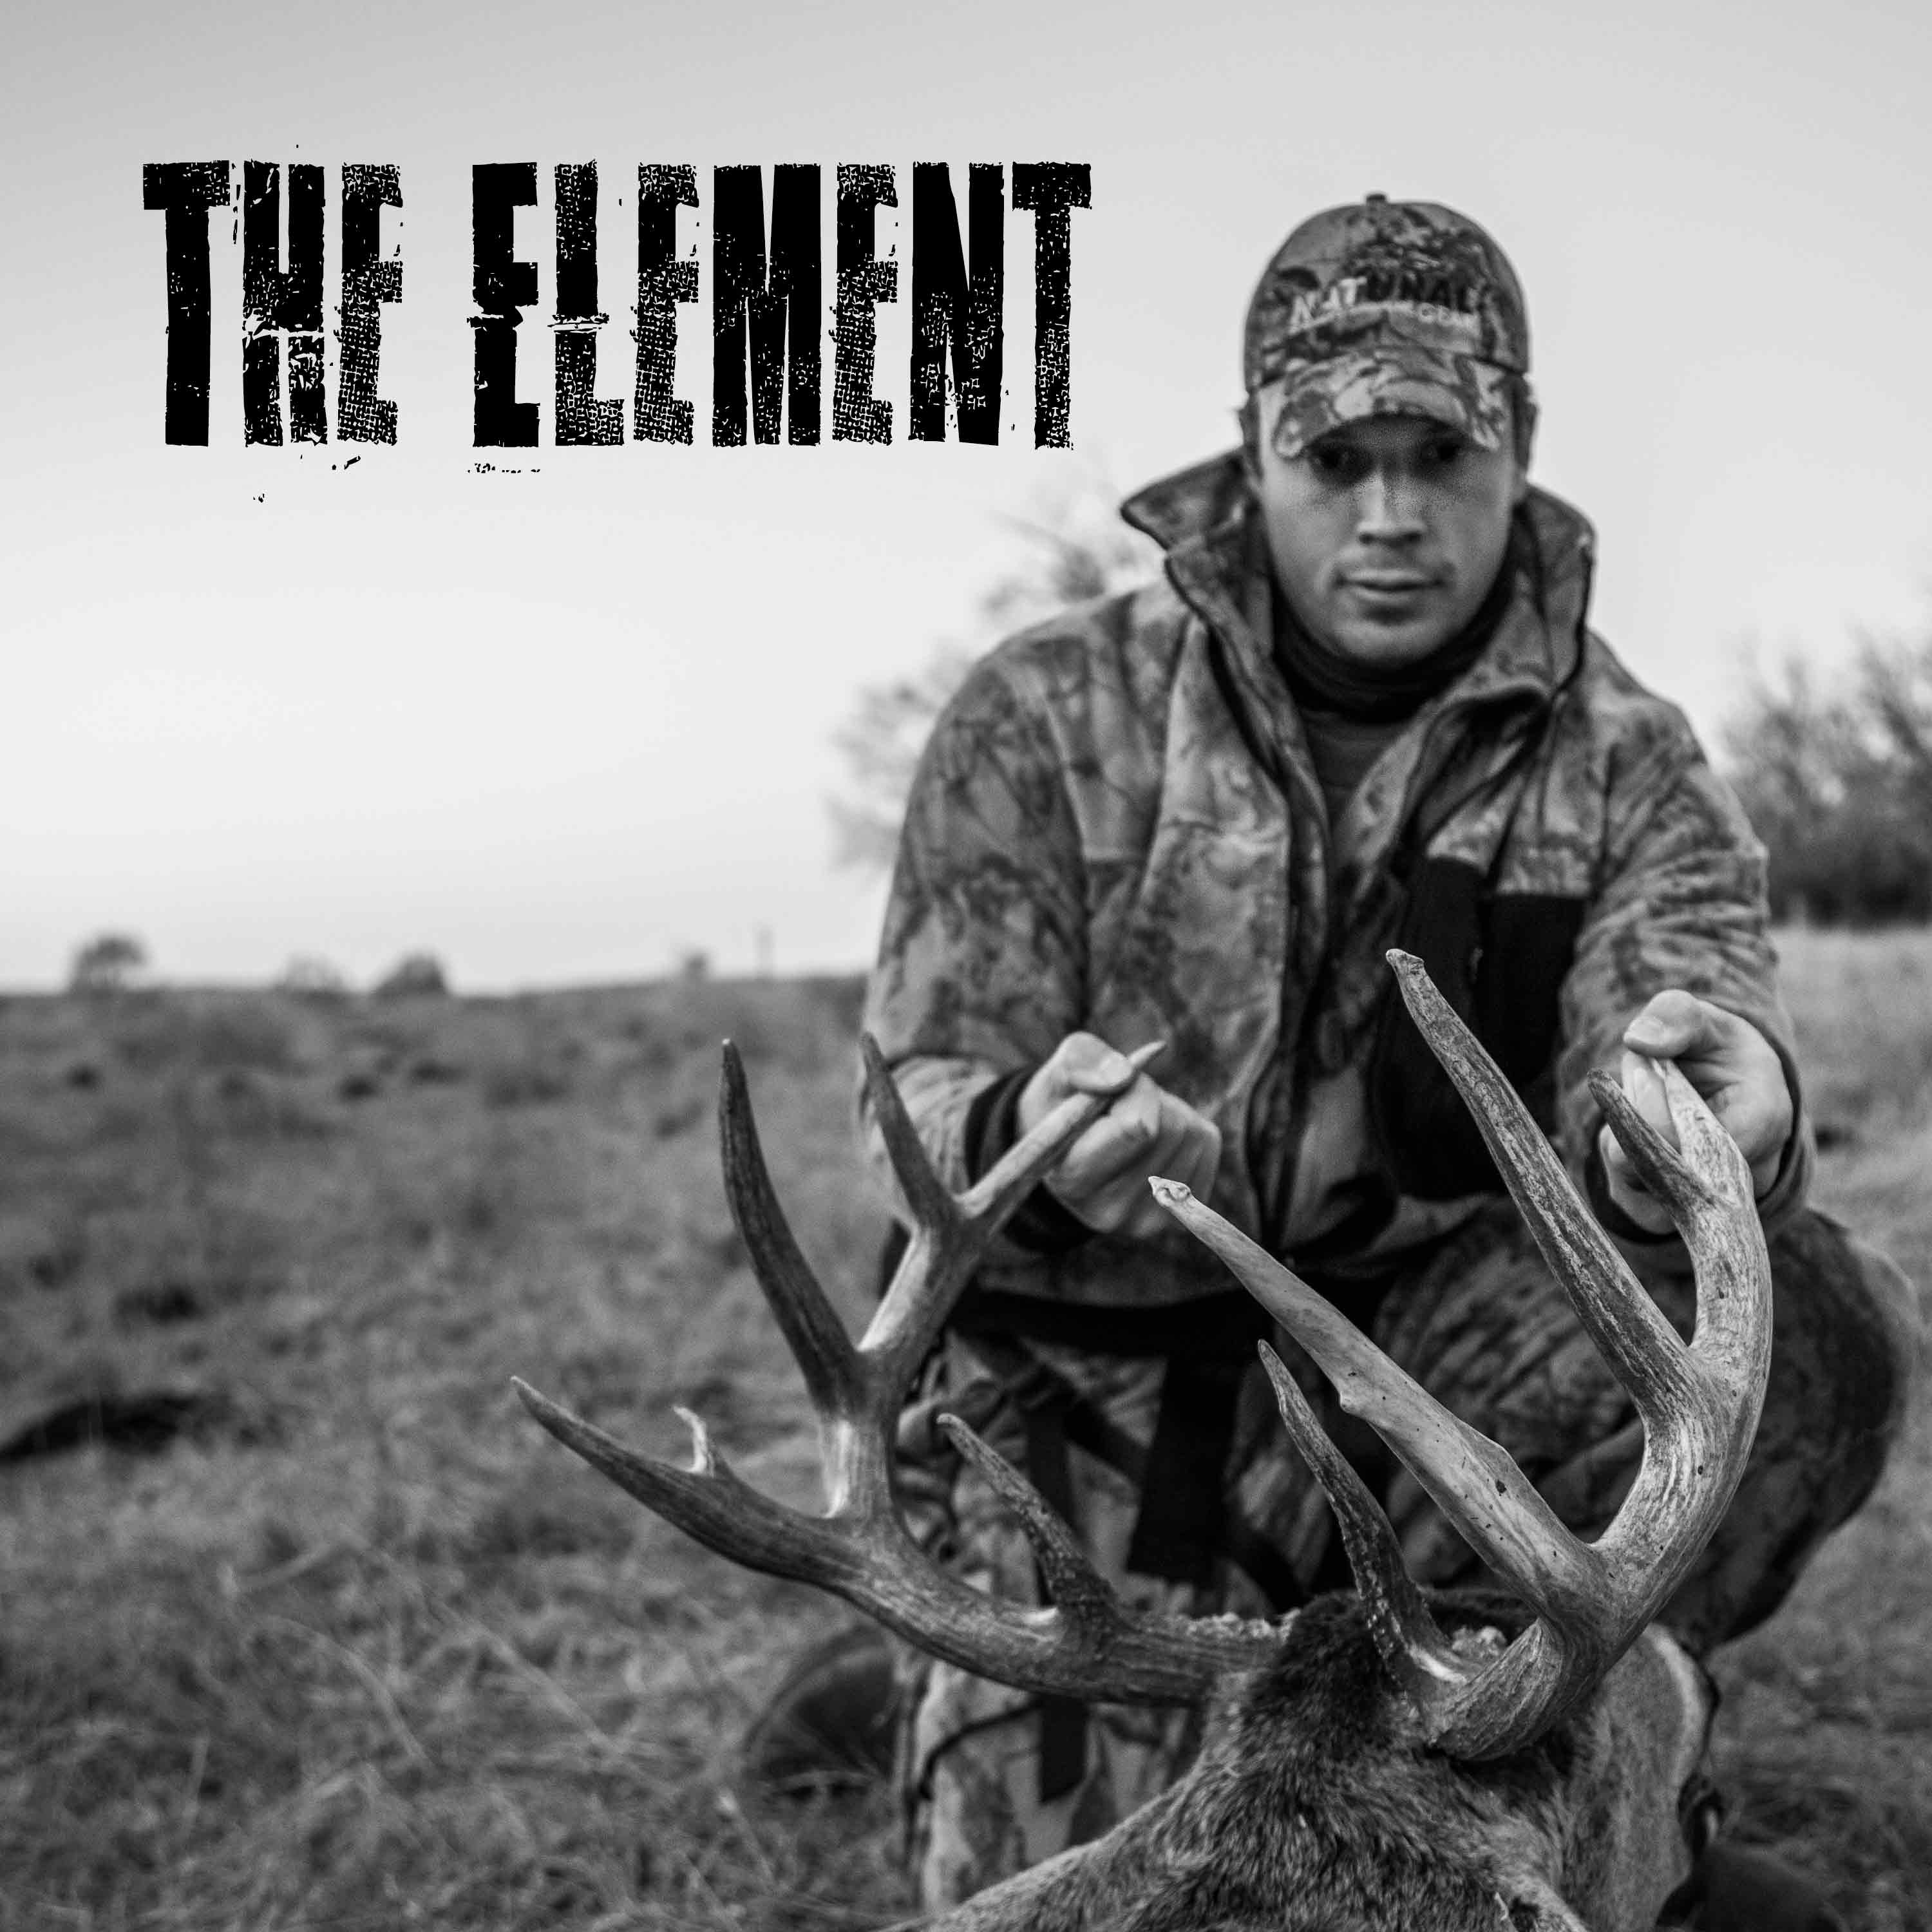 E214: NEW BOWS and NE! (How To Pack For An Out-of-State Whitetail Deer Hunt, Archery Hunting Equipment, Broadheads, Meal Prep, Trip Planning)